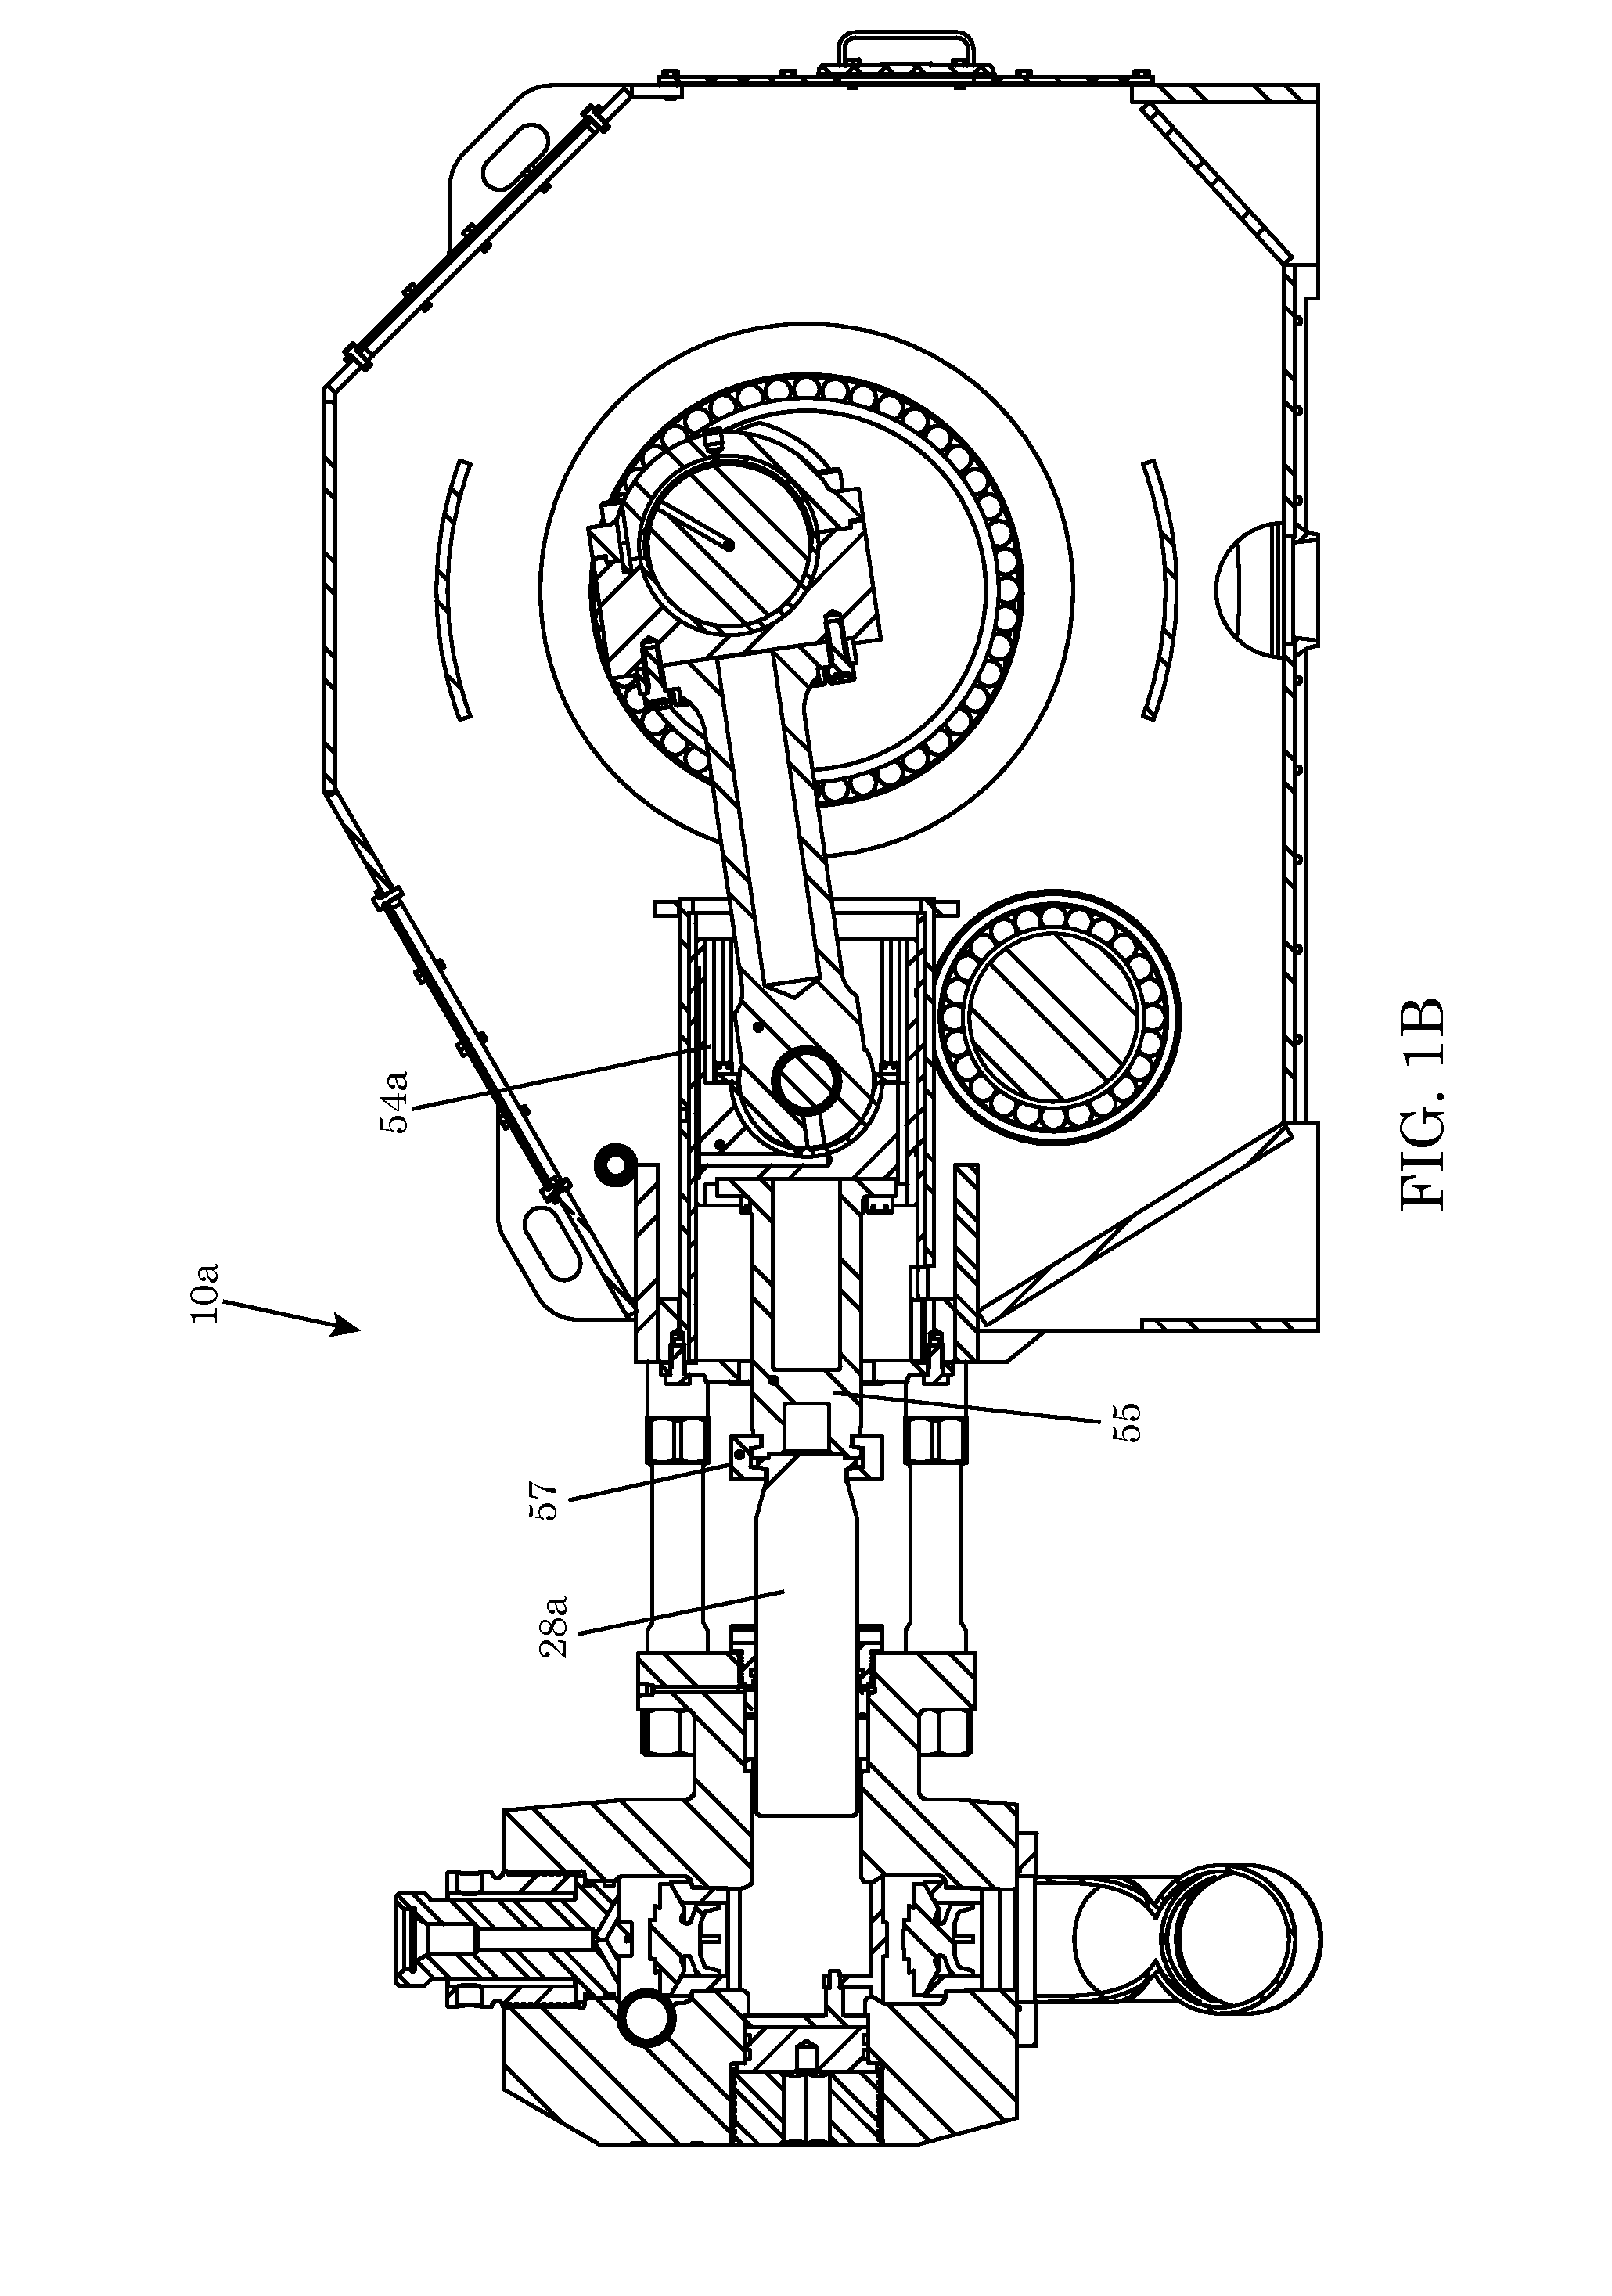 Plunger Pump, Plunger, and Method of Manufacturing Plunger Pump